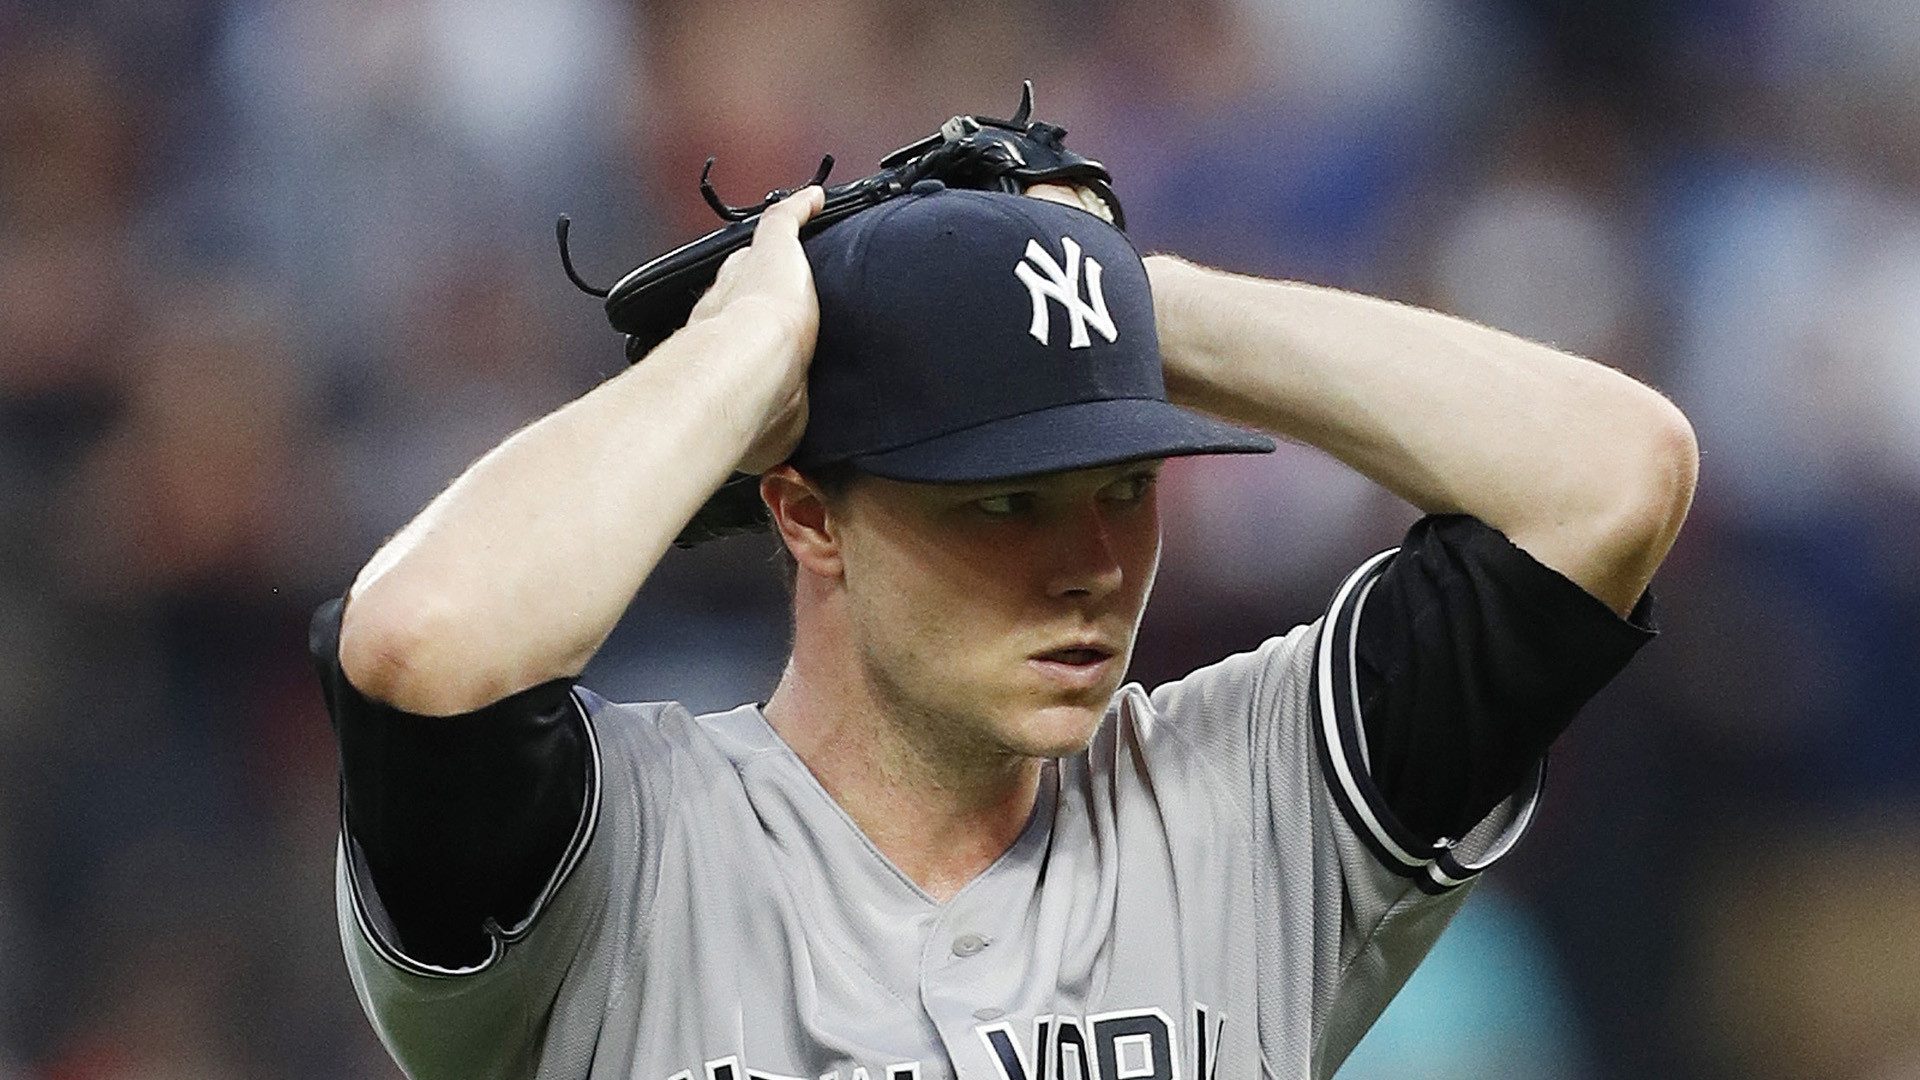 1920x1080 Yankees offense struggles again with Sonny Gray on mound | MLB | Sporting  News